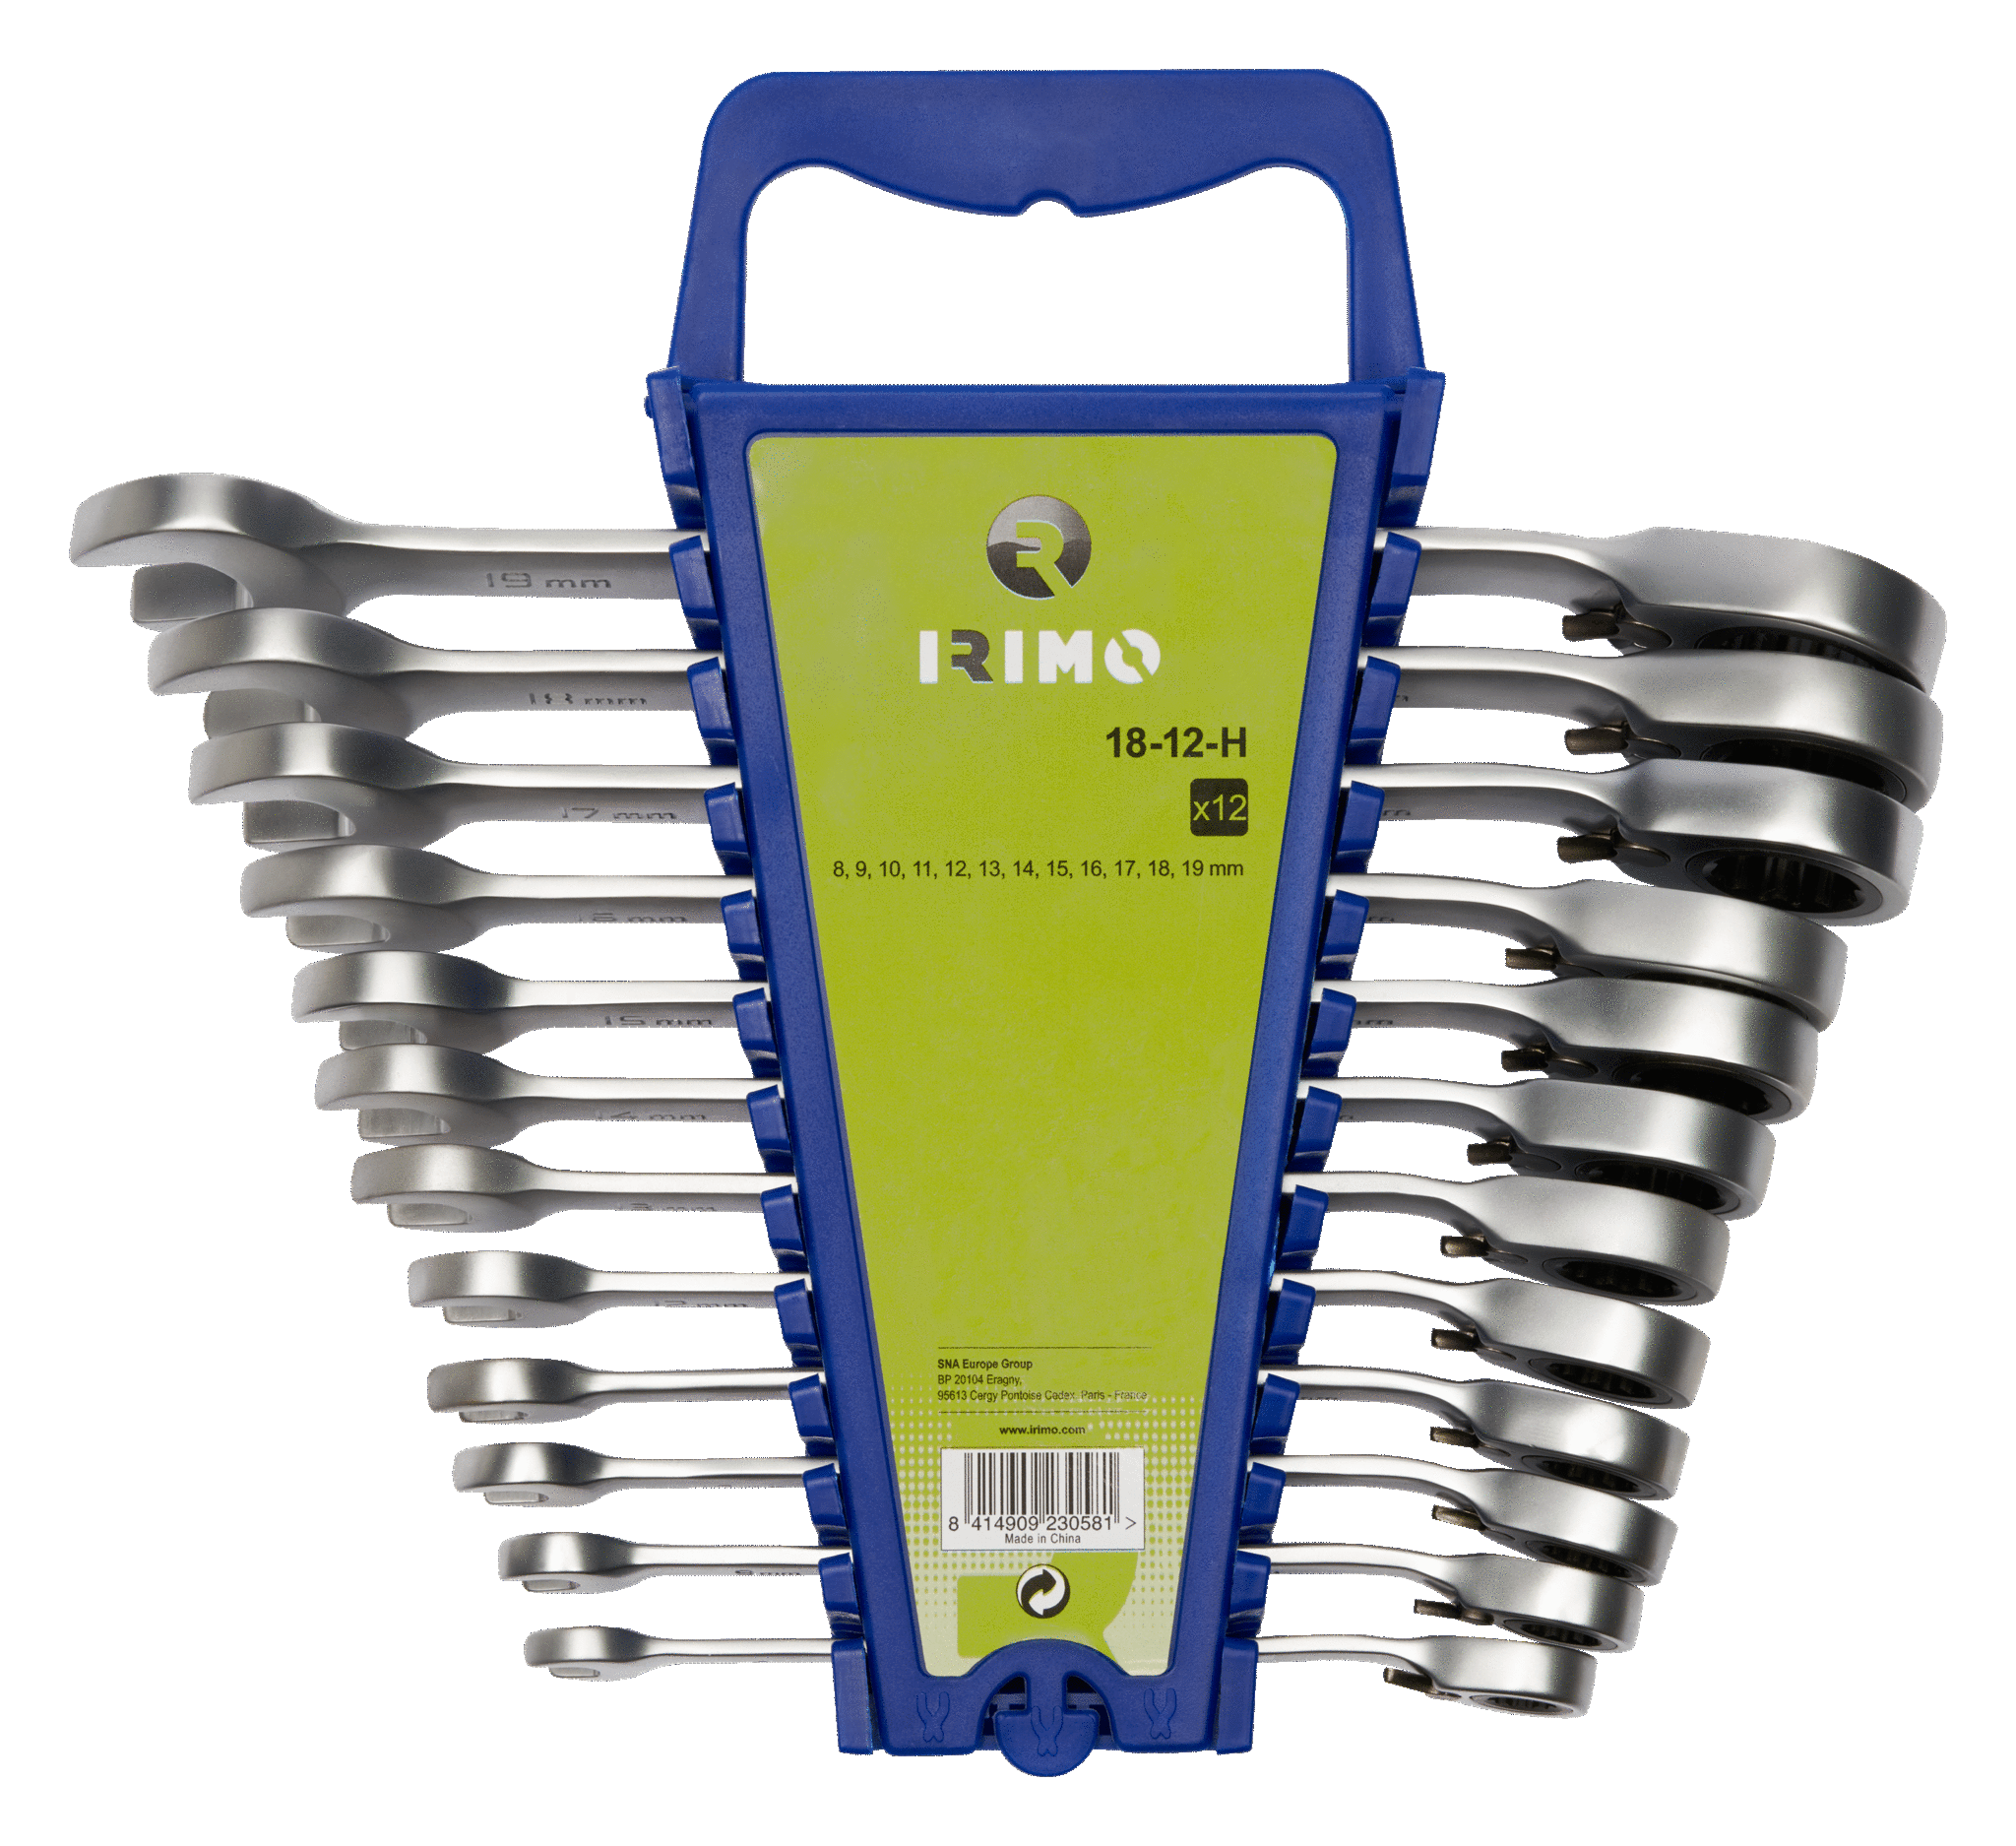 Delihom Ratcheting Multi Socket Wrench Set Patented Multi-Functional Box End Wrench Metric with Innovative Adapter Sockets and S2 Steel Screwdriver Bits 